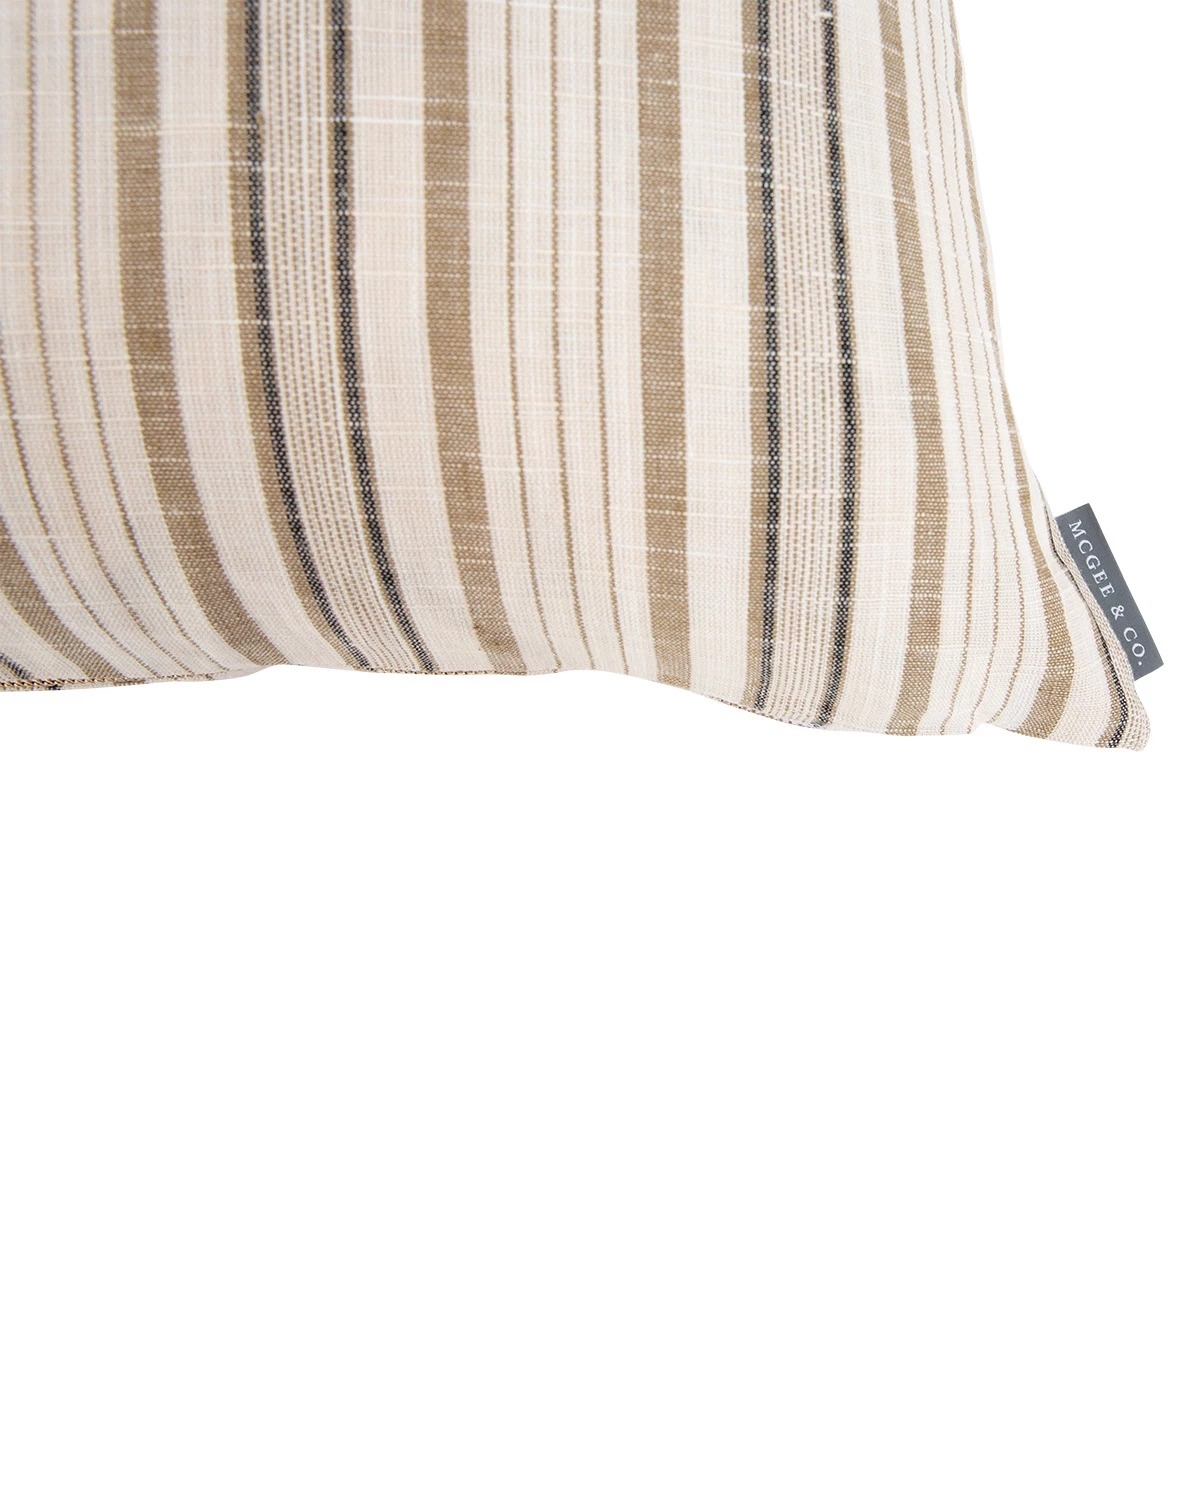 ARCHIE PILLOW WITHOUT INSERT, CAMEL, 14" x 20" - Image 1